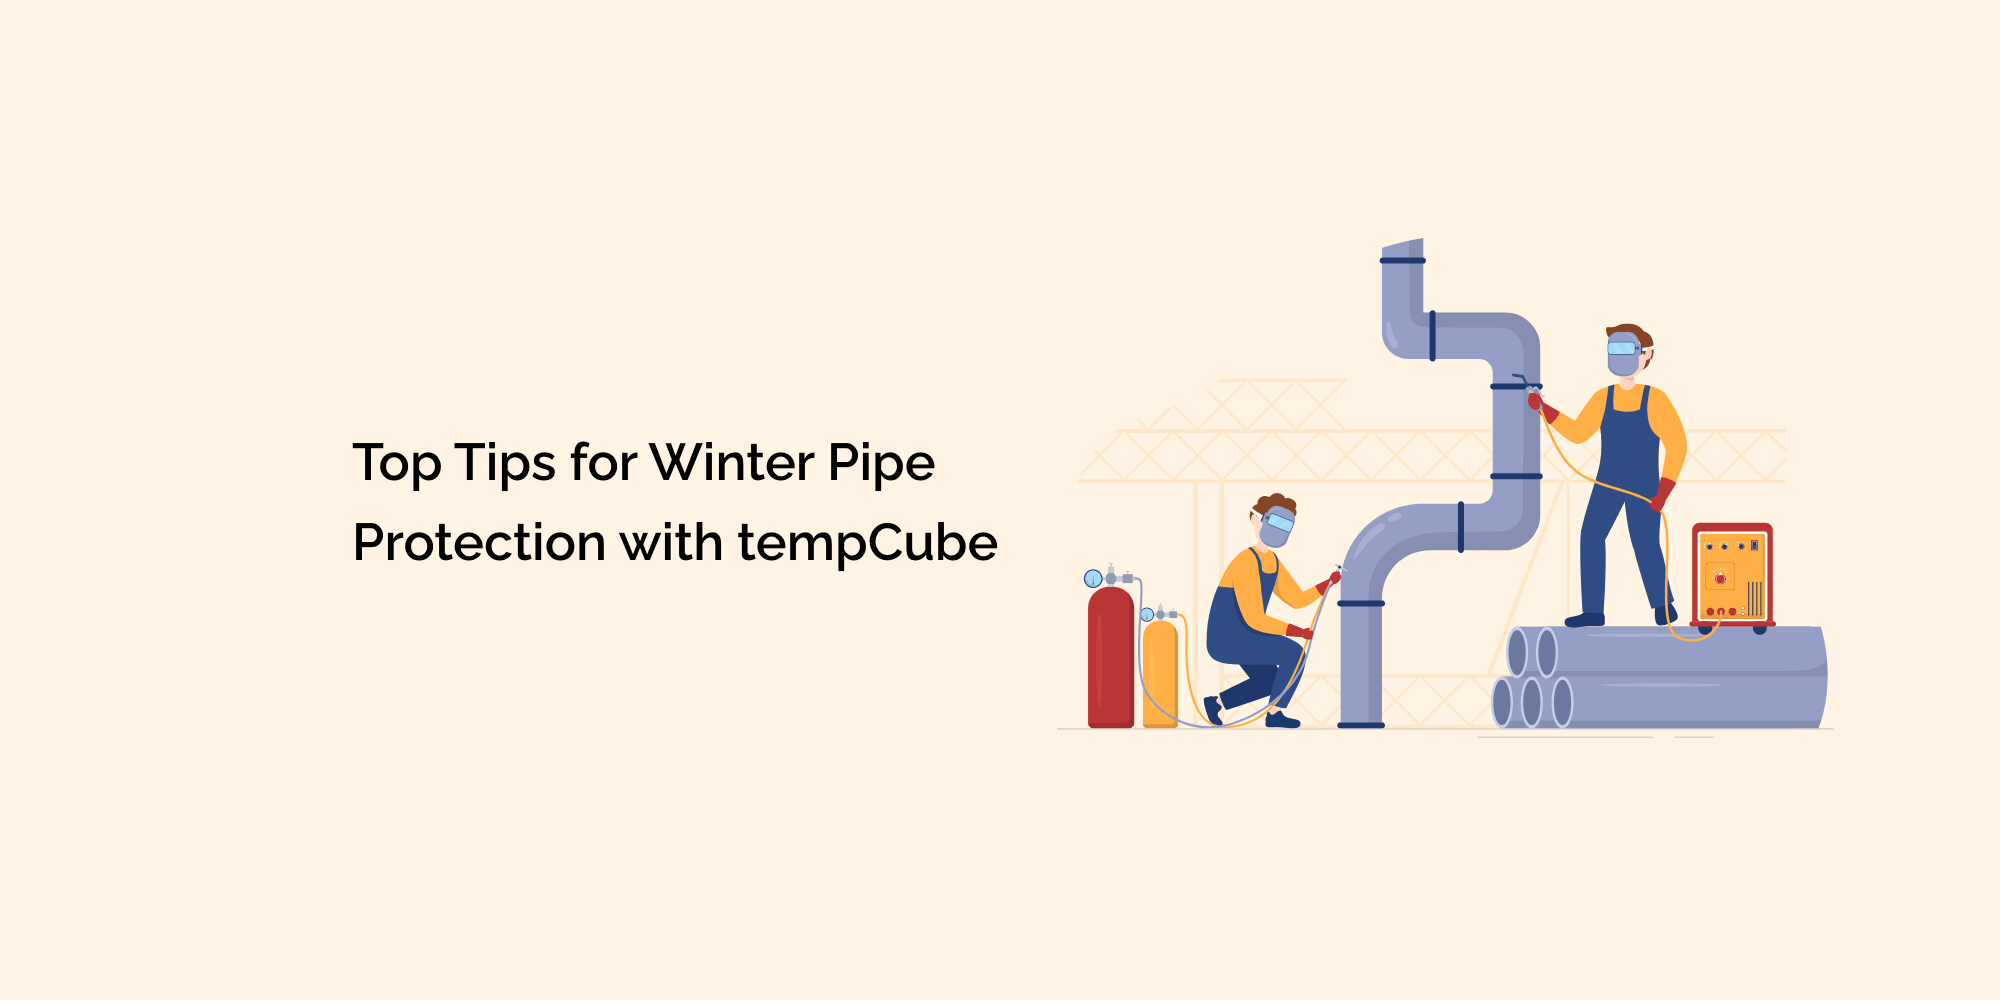 Top Tips for Winter Pipe Protection with tempCube